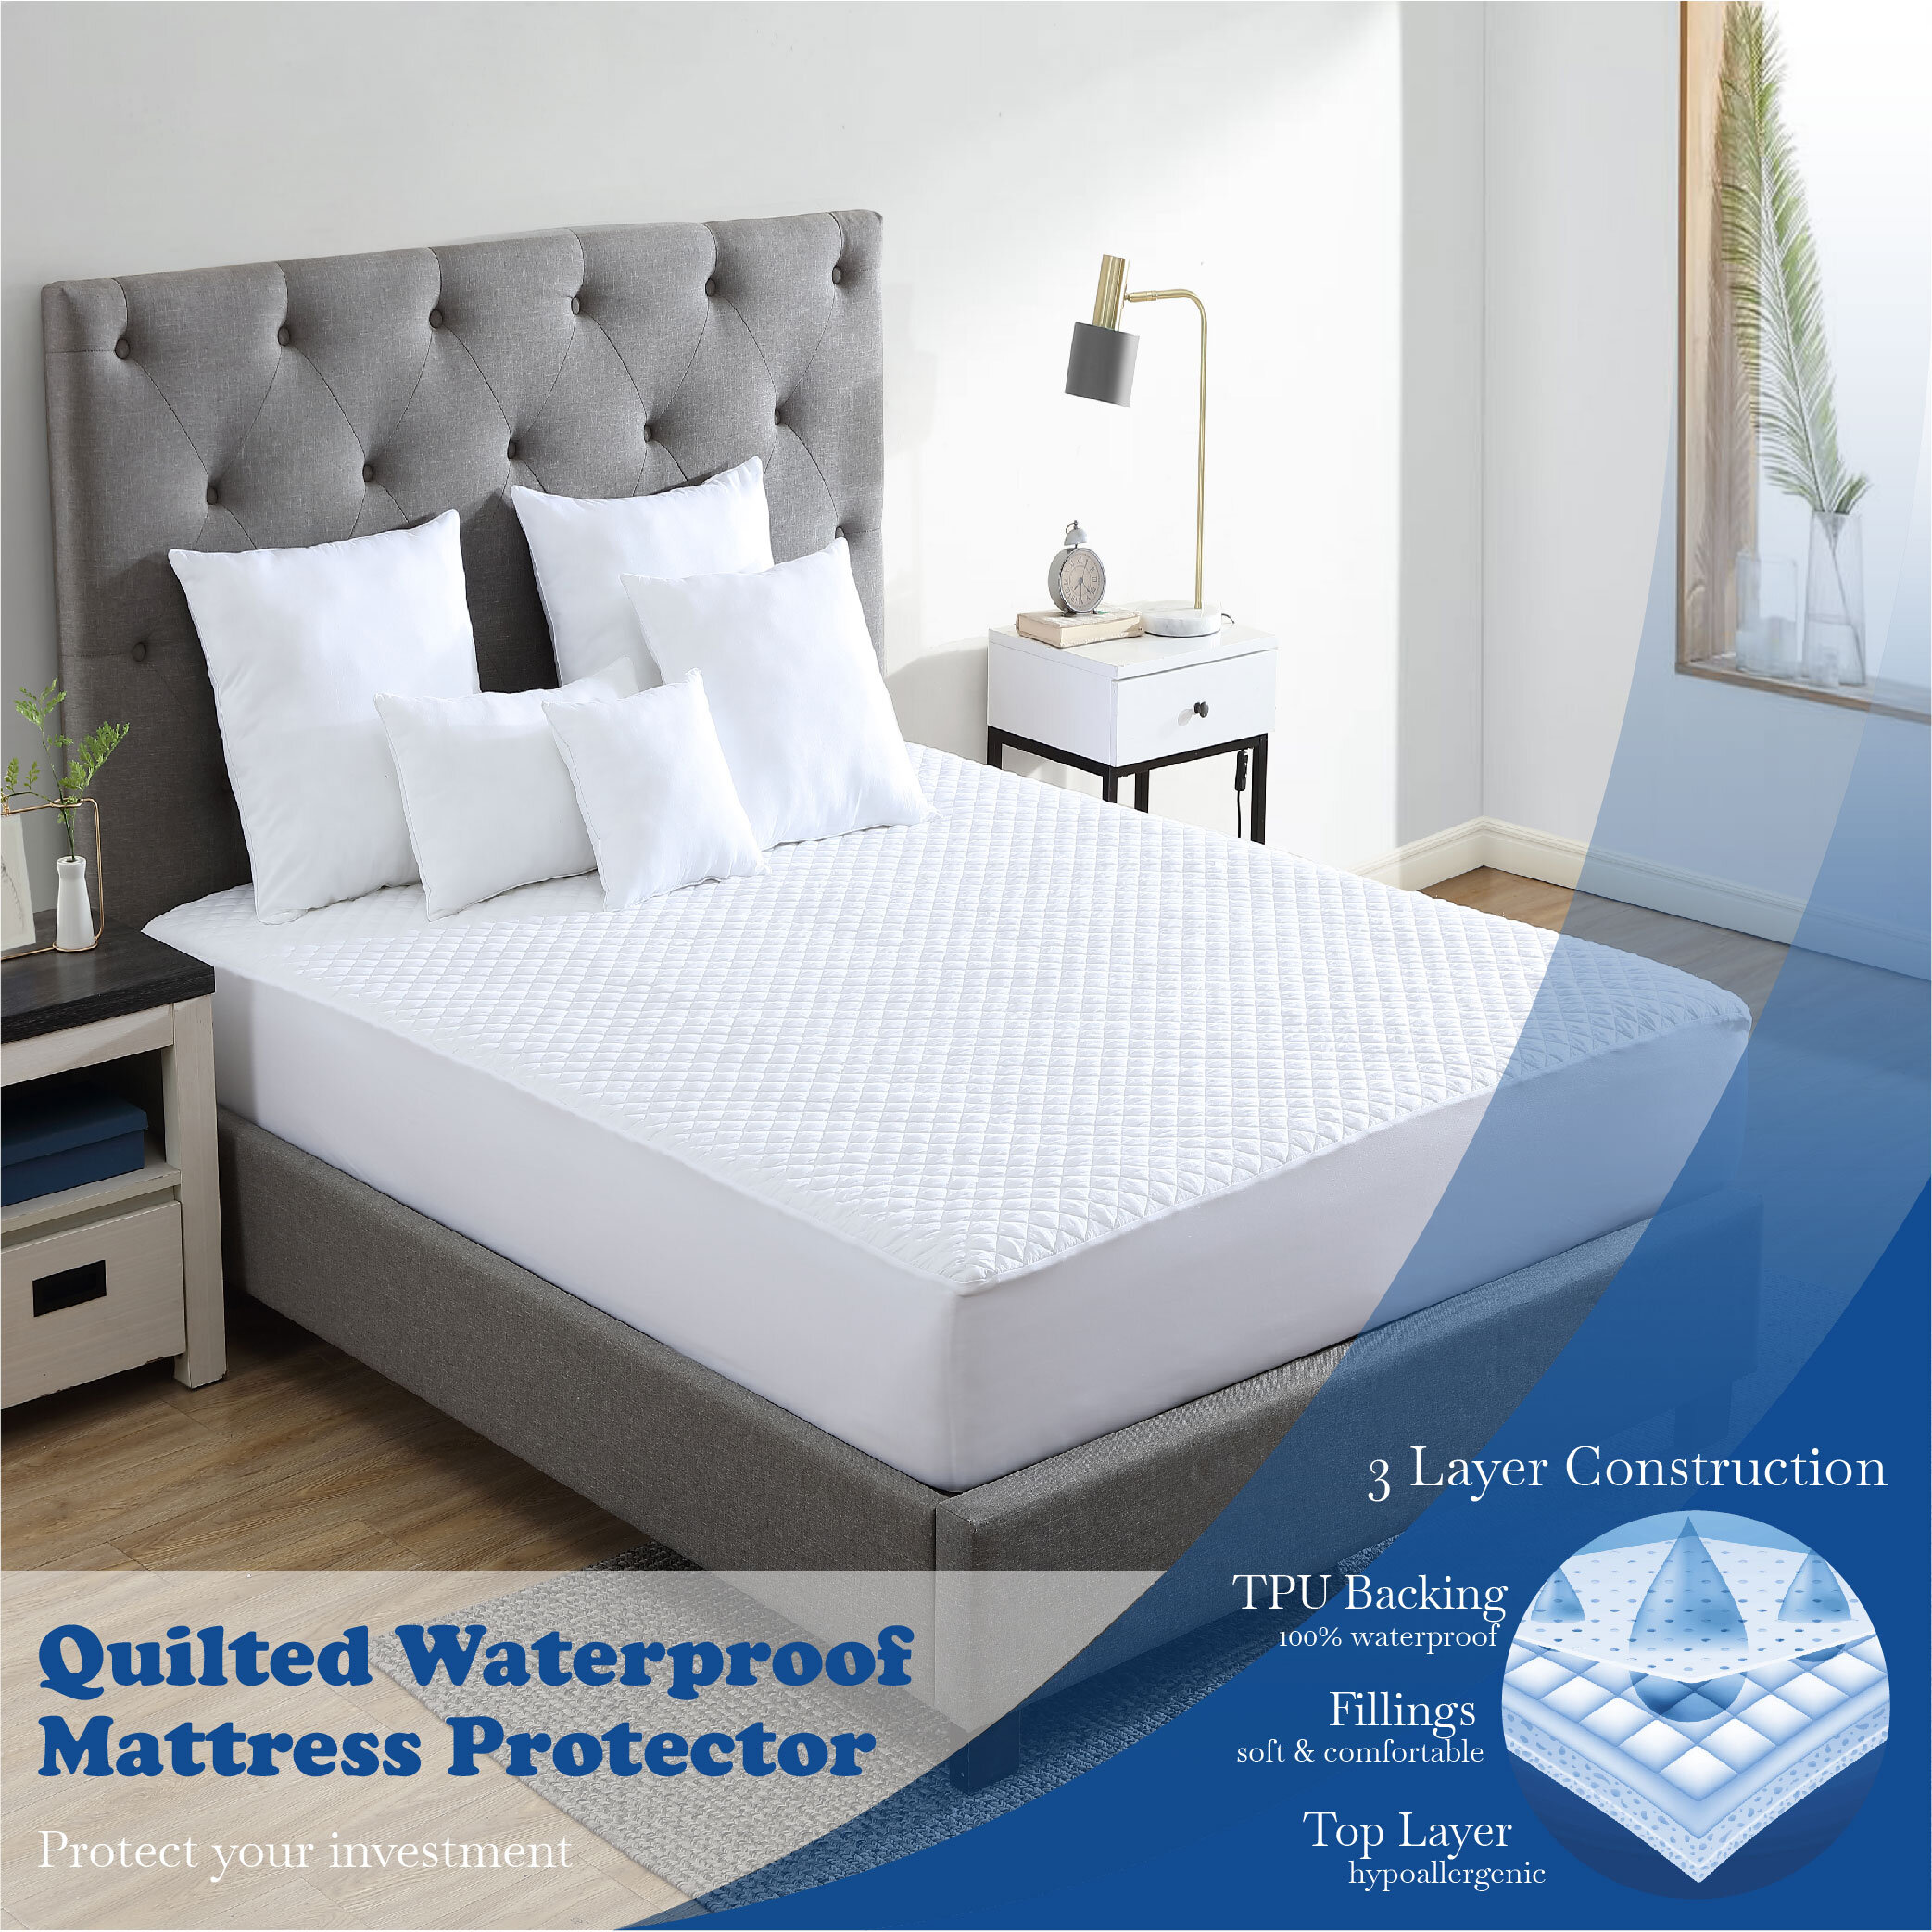 WATERPROOF QUILTED SOFT MATTRESS PROTECTOR FITTED SHEET COVER Non-Allergenic